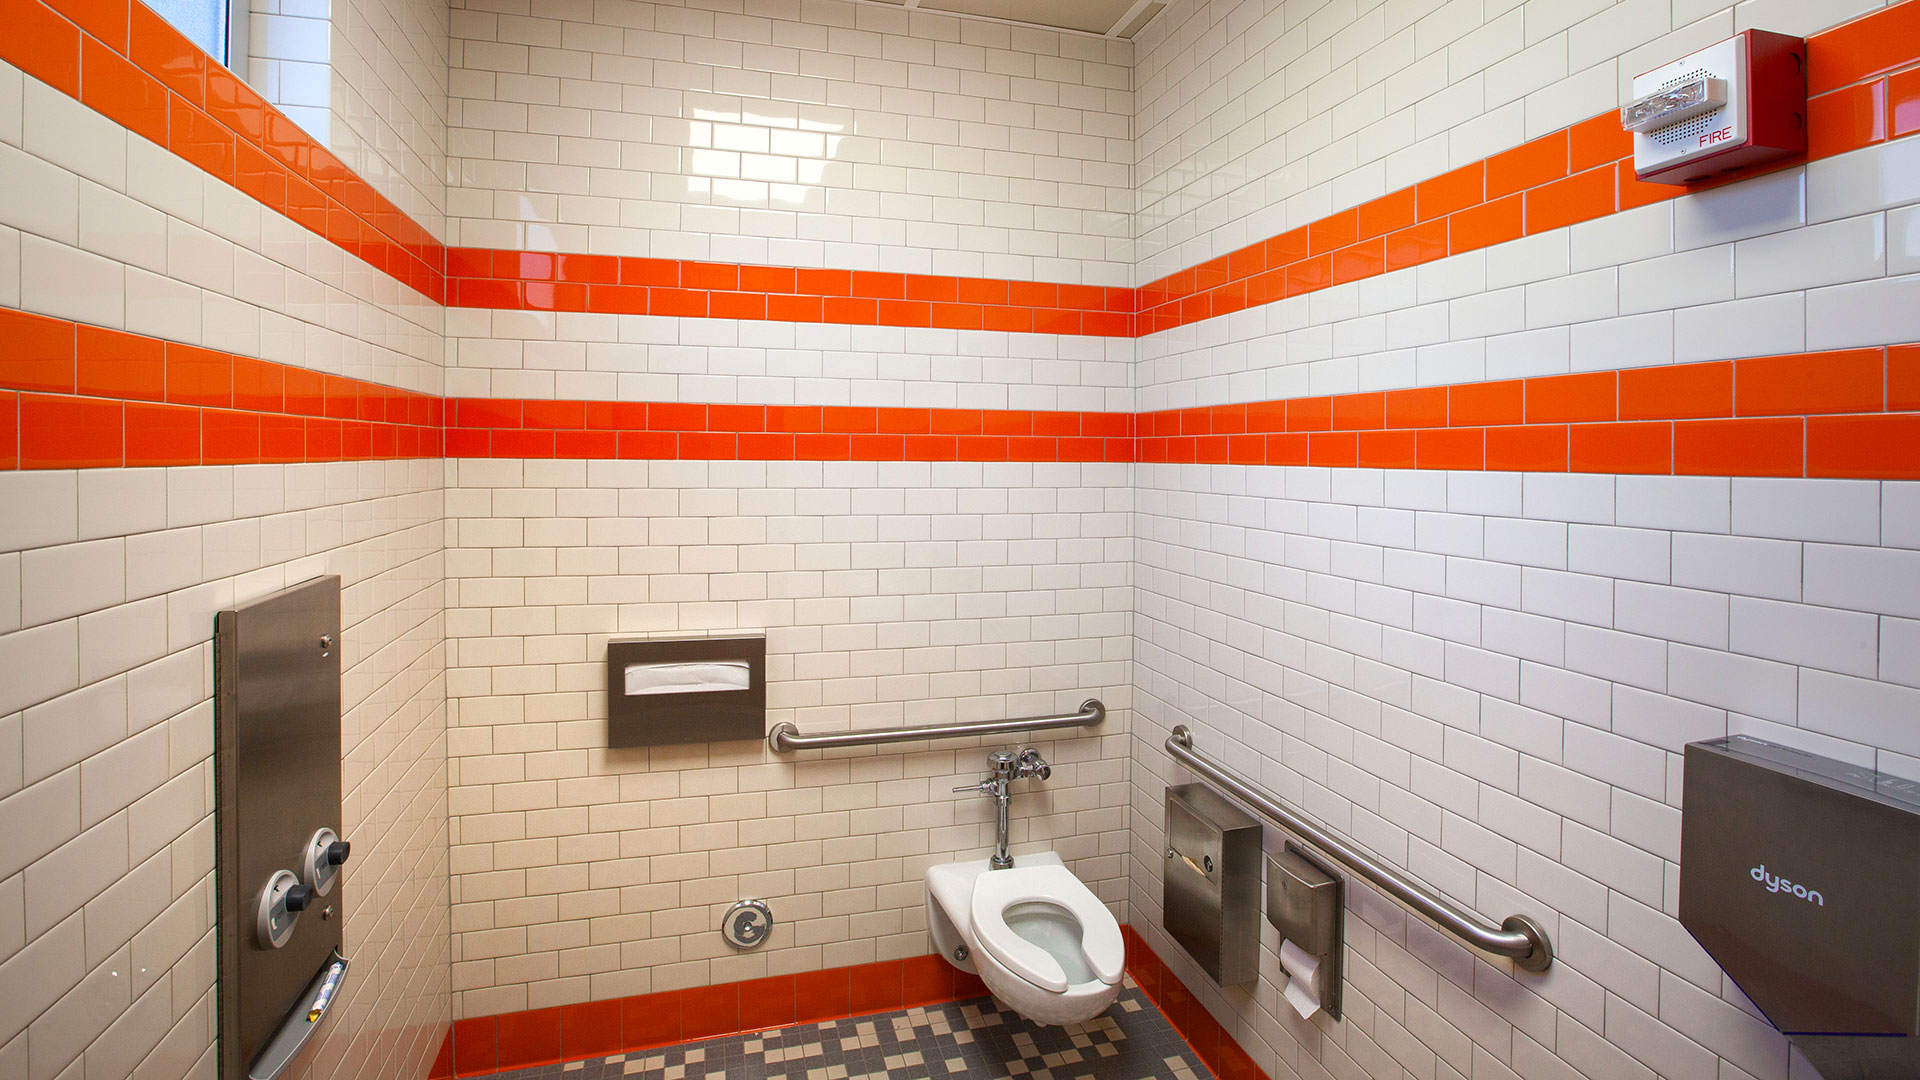 Interior of new restrooms, with white and orange tile walls and gray tile floors.